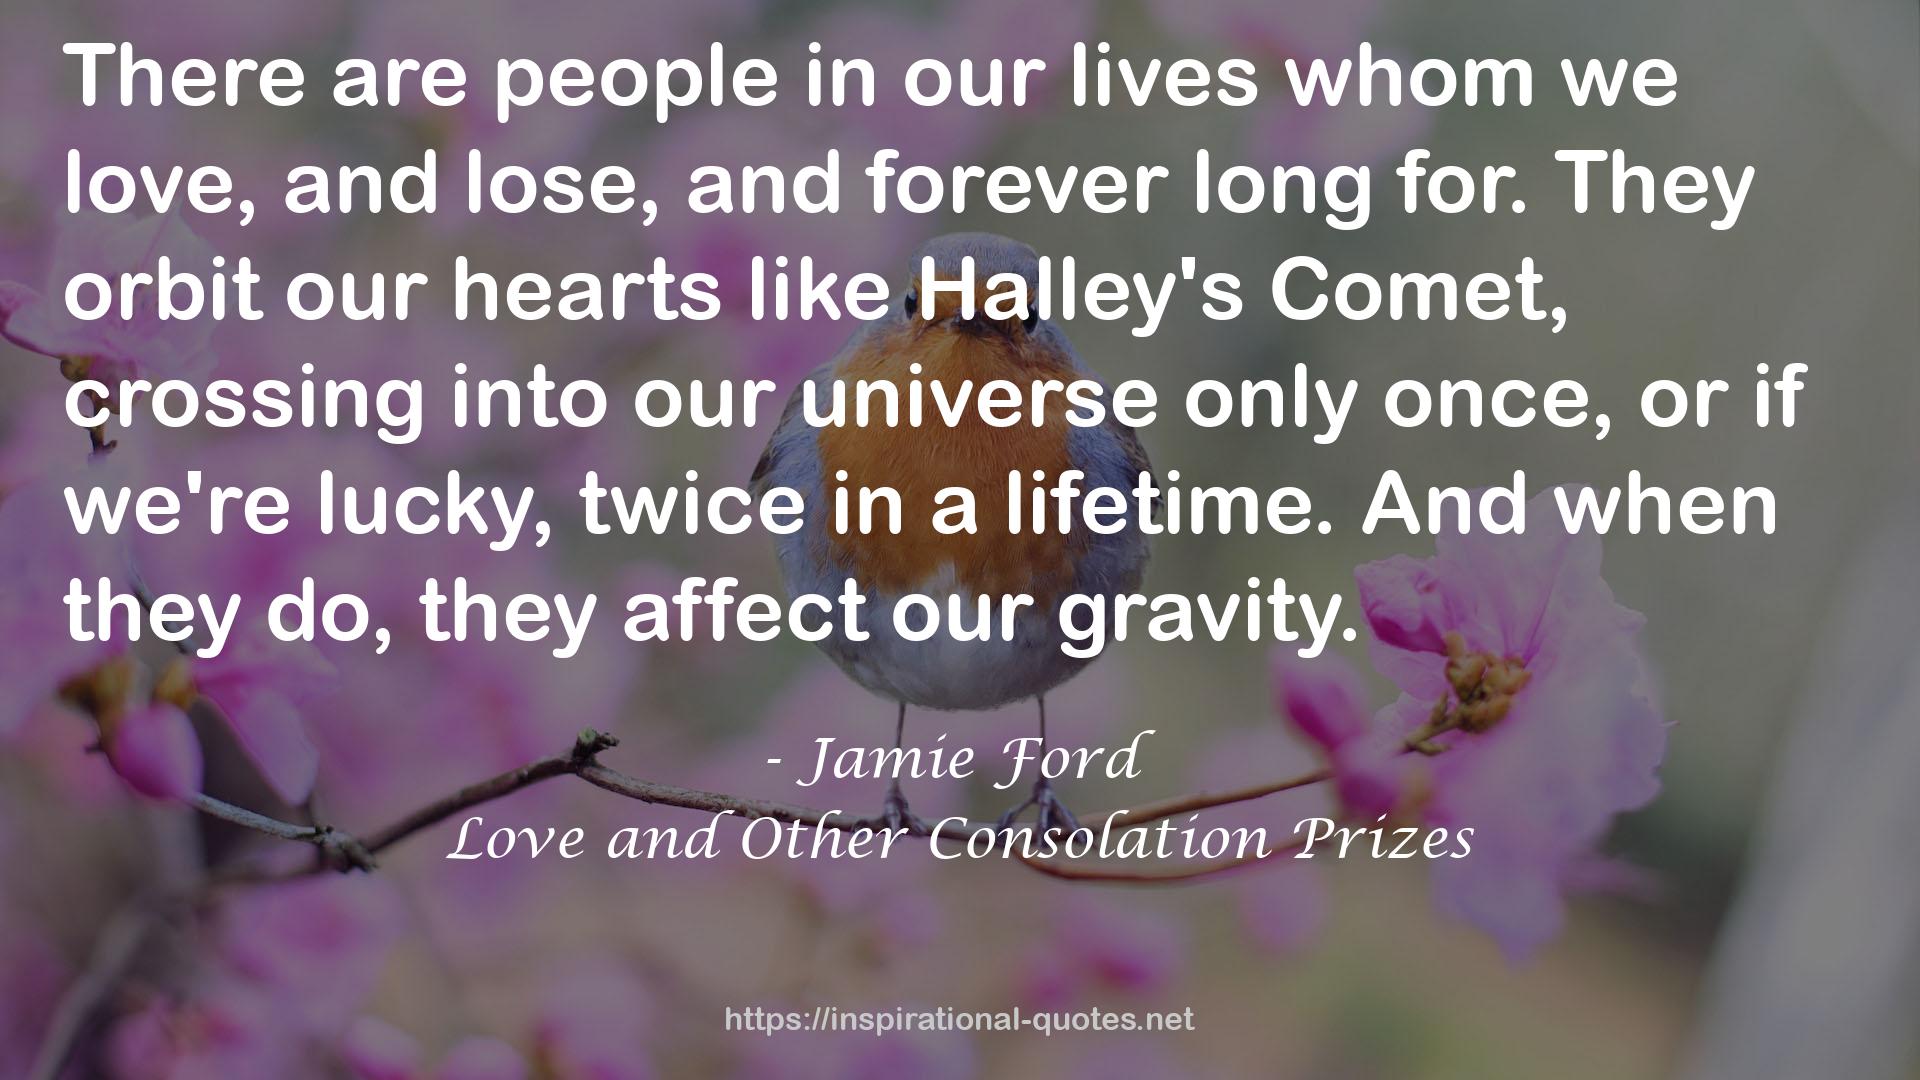 Love and Other Consolation Prizes QUOTES